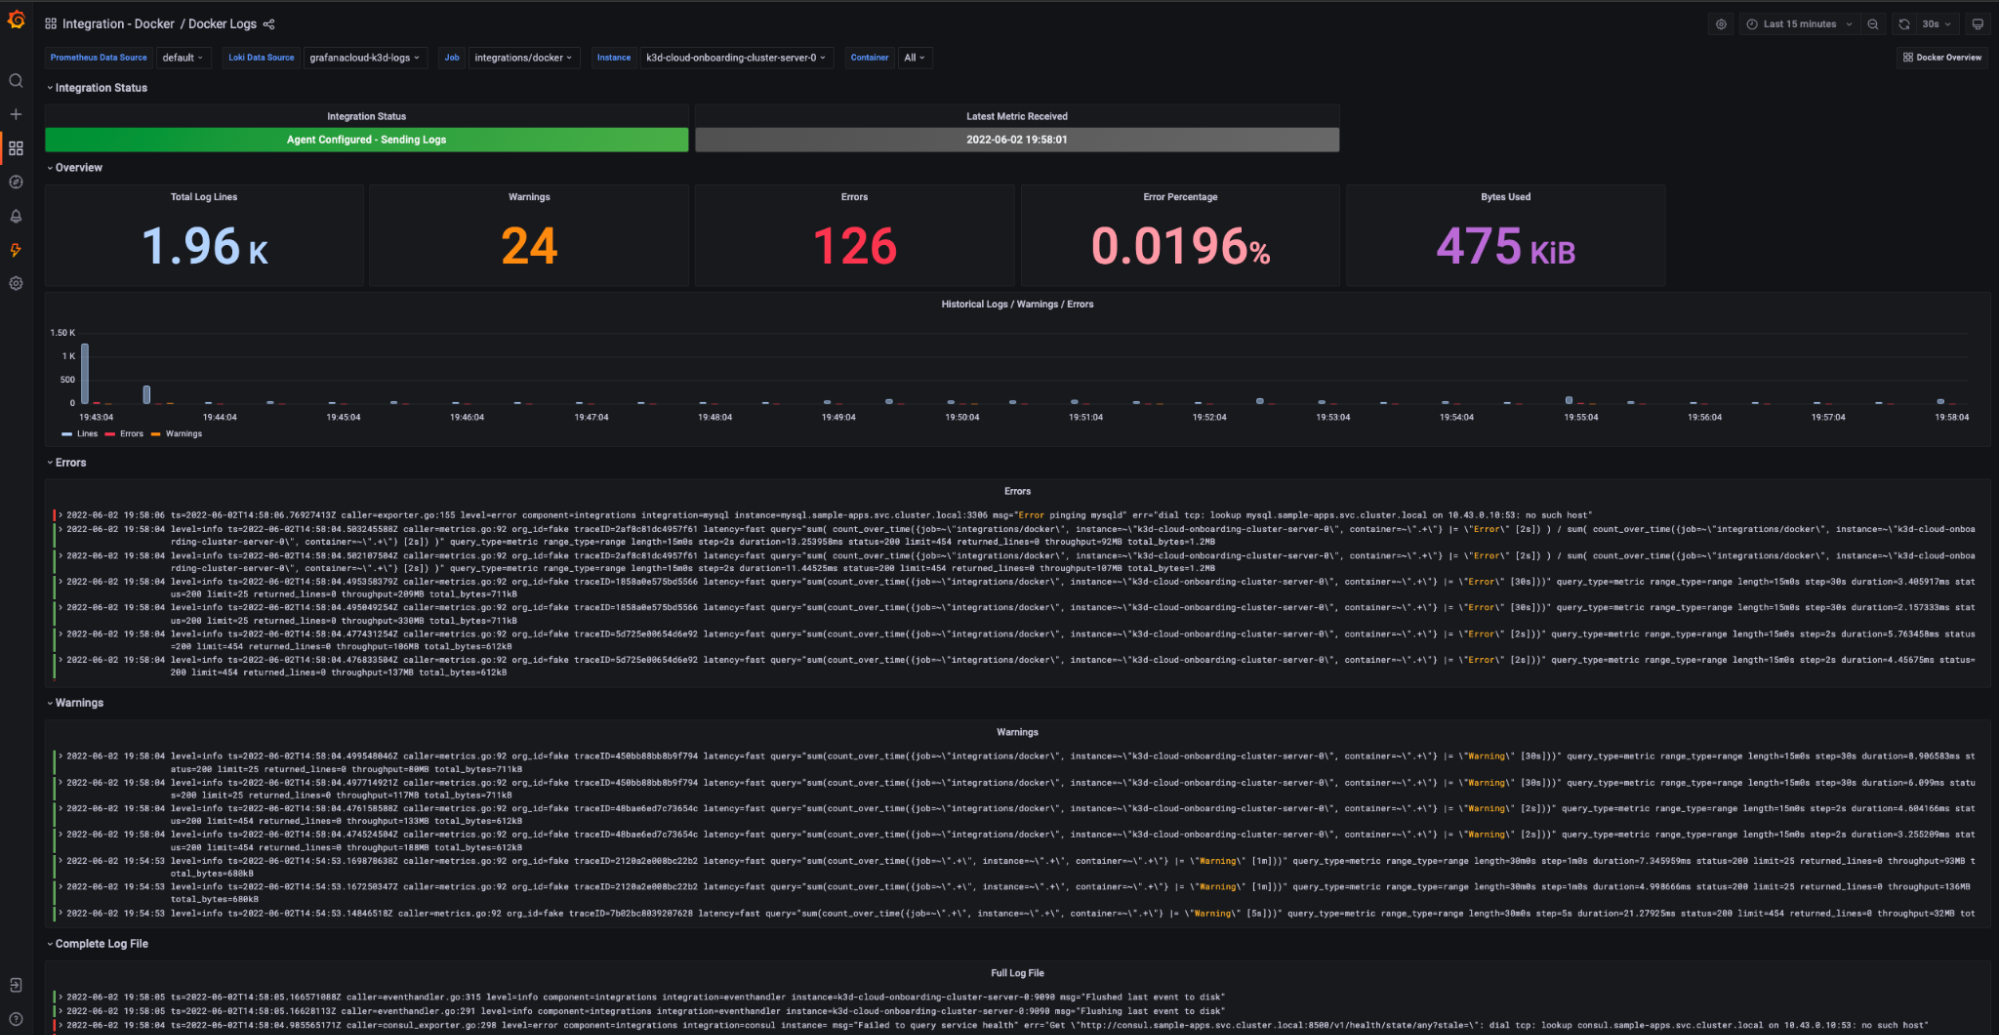 The prebuilt Docker logs dashboard in the Grafana Cloud Docker integration provides details on Docker log files, such as a general overview of errors, warnings, and log file sizes.